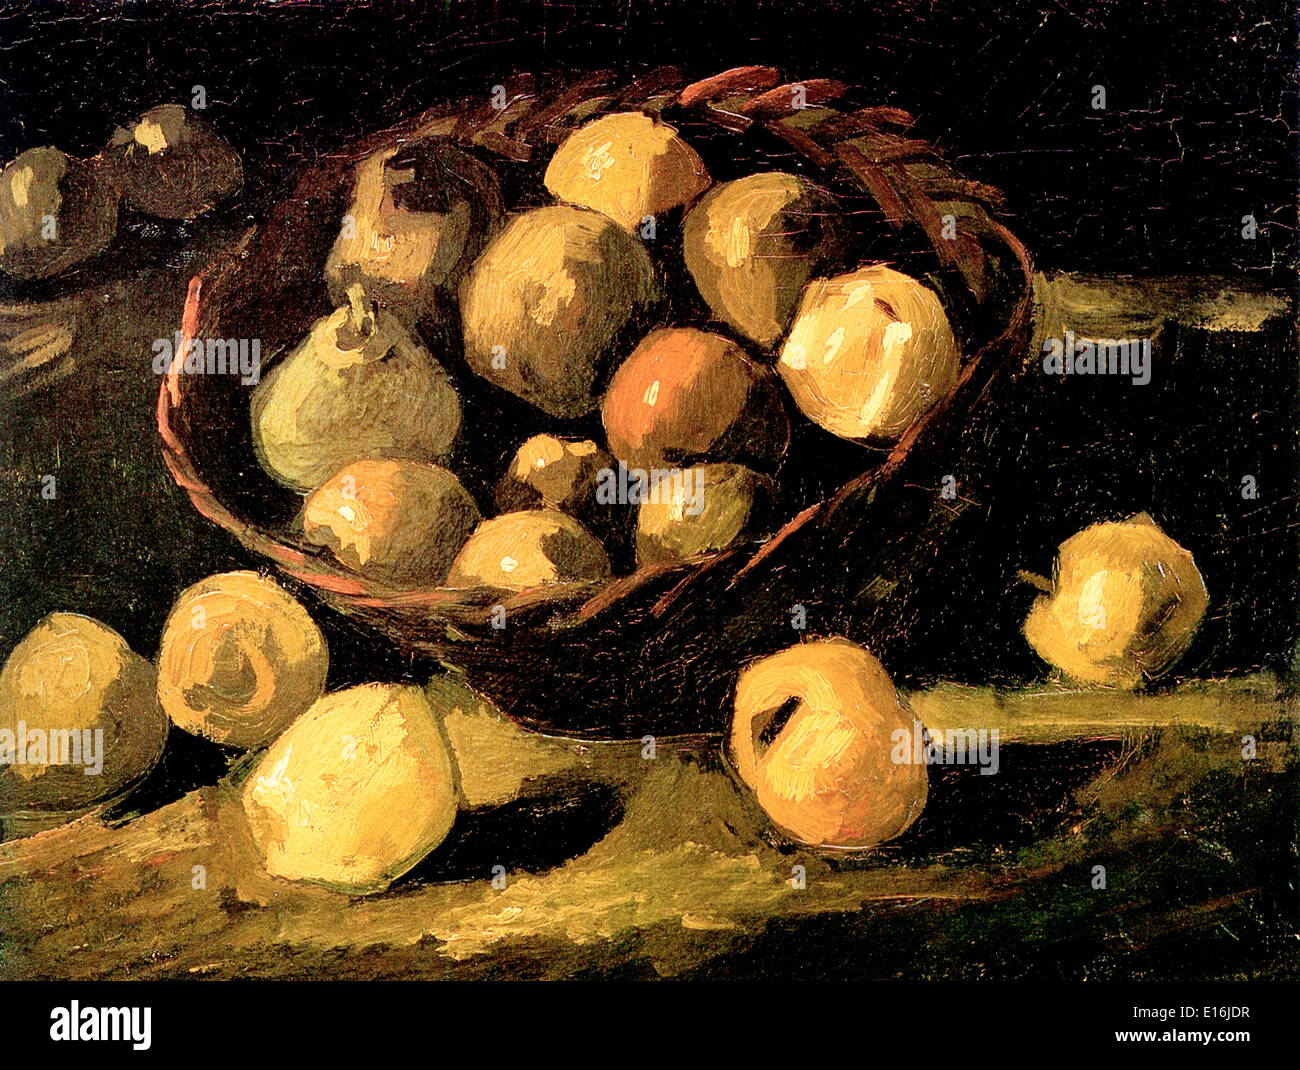 Basket of Apples by Vincent Van Gogh Stock Photo